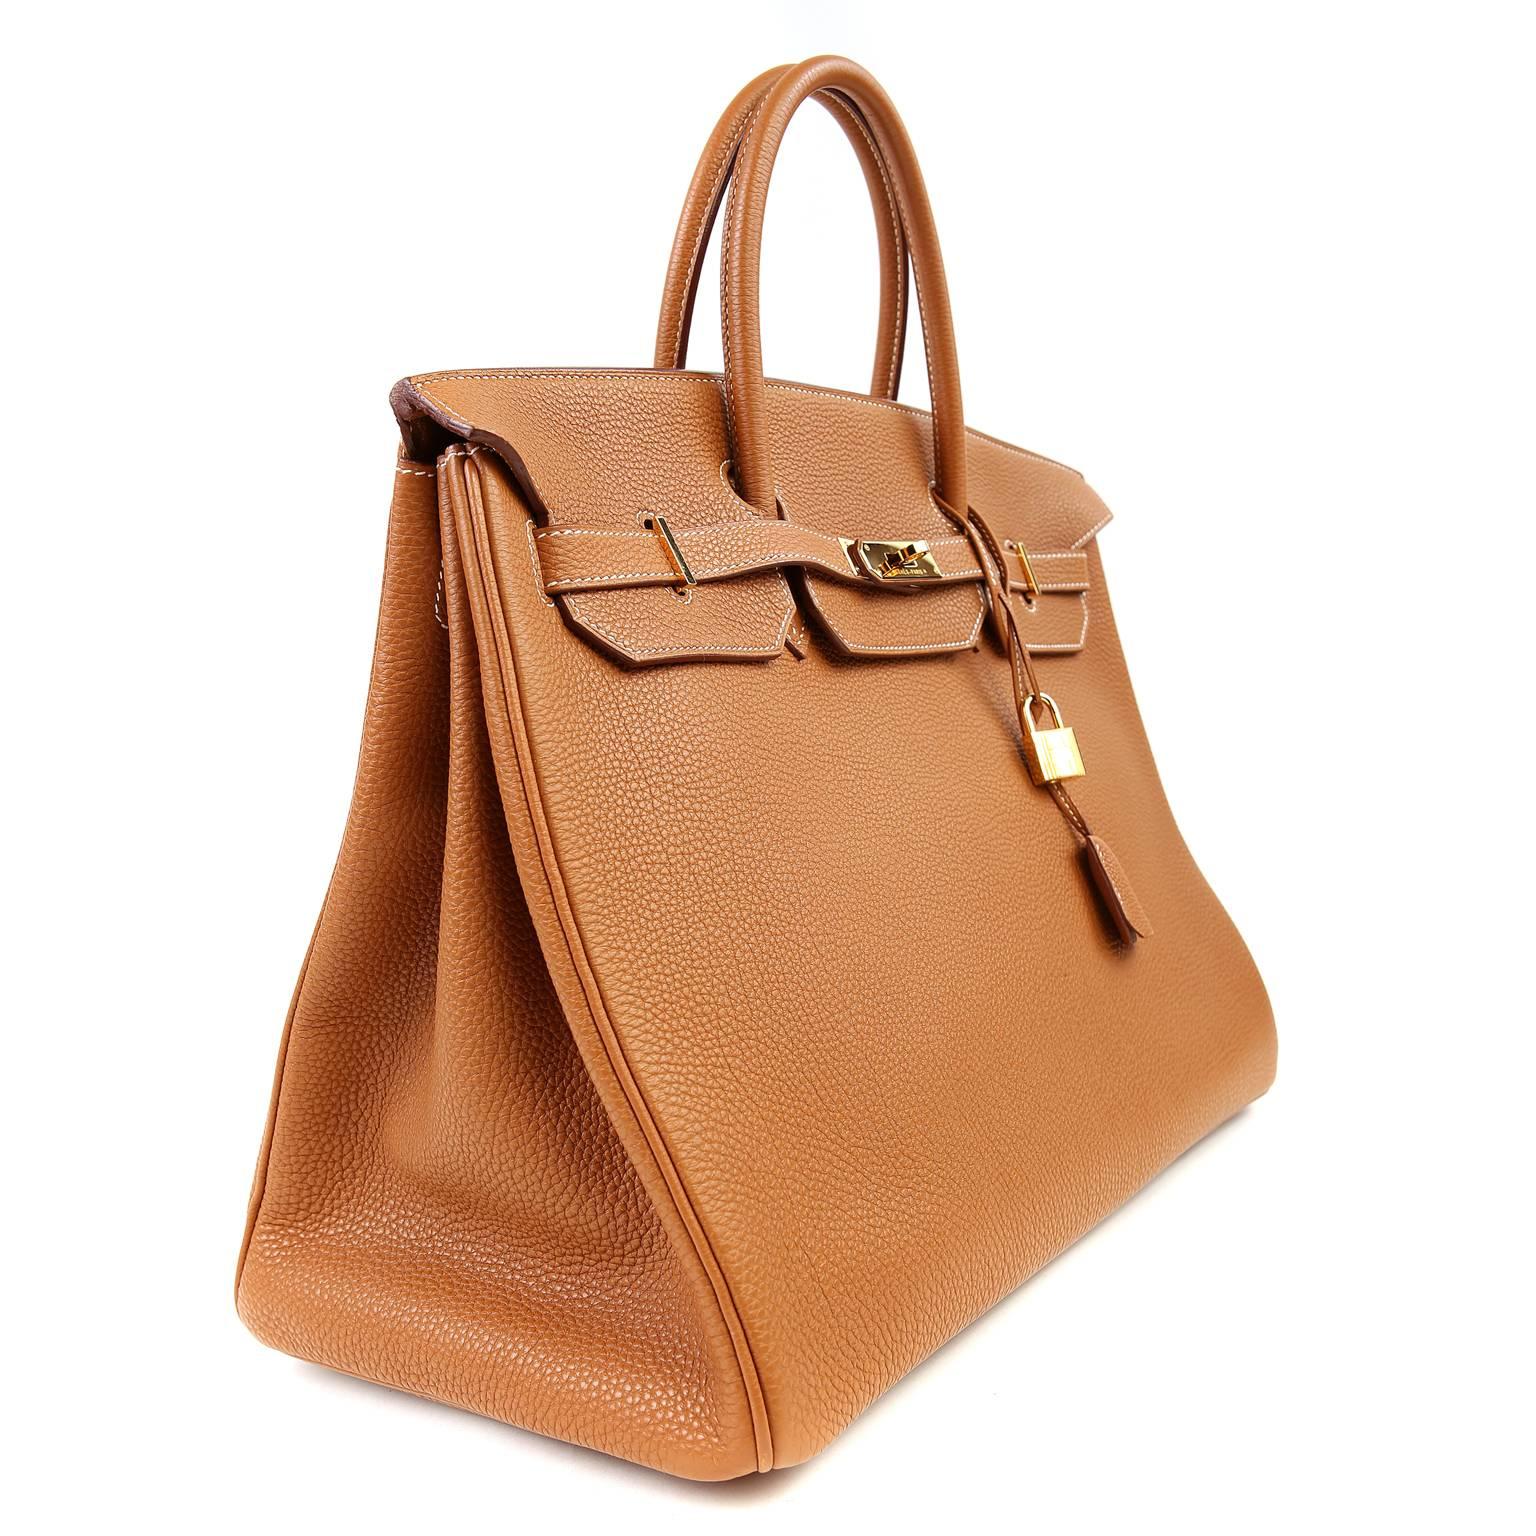 Hermès Gold 40 cm  Togo Birkin Bag is pristine. The coveted classic color is a must have neutral and remains on many wish lists.   Entirely crafted by hand, the Hermès Birkin is possibly the most sought after handbag worldwide.  
 
  Scratch